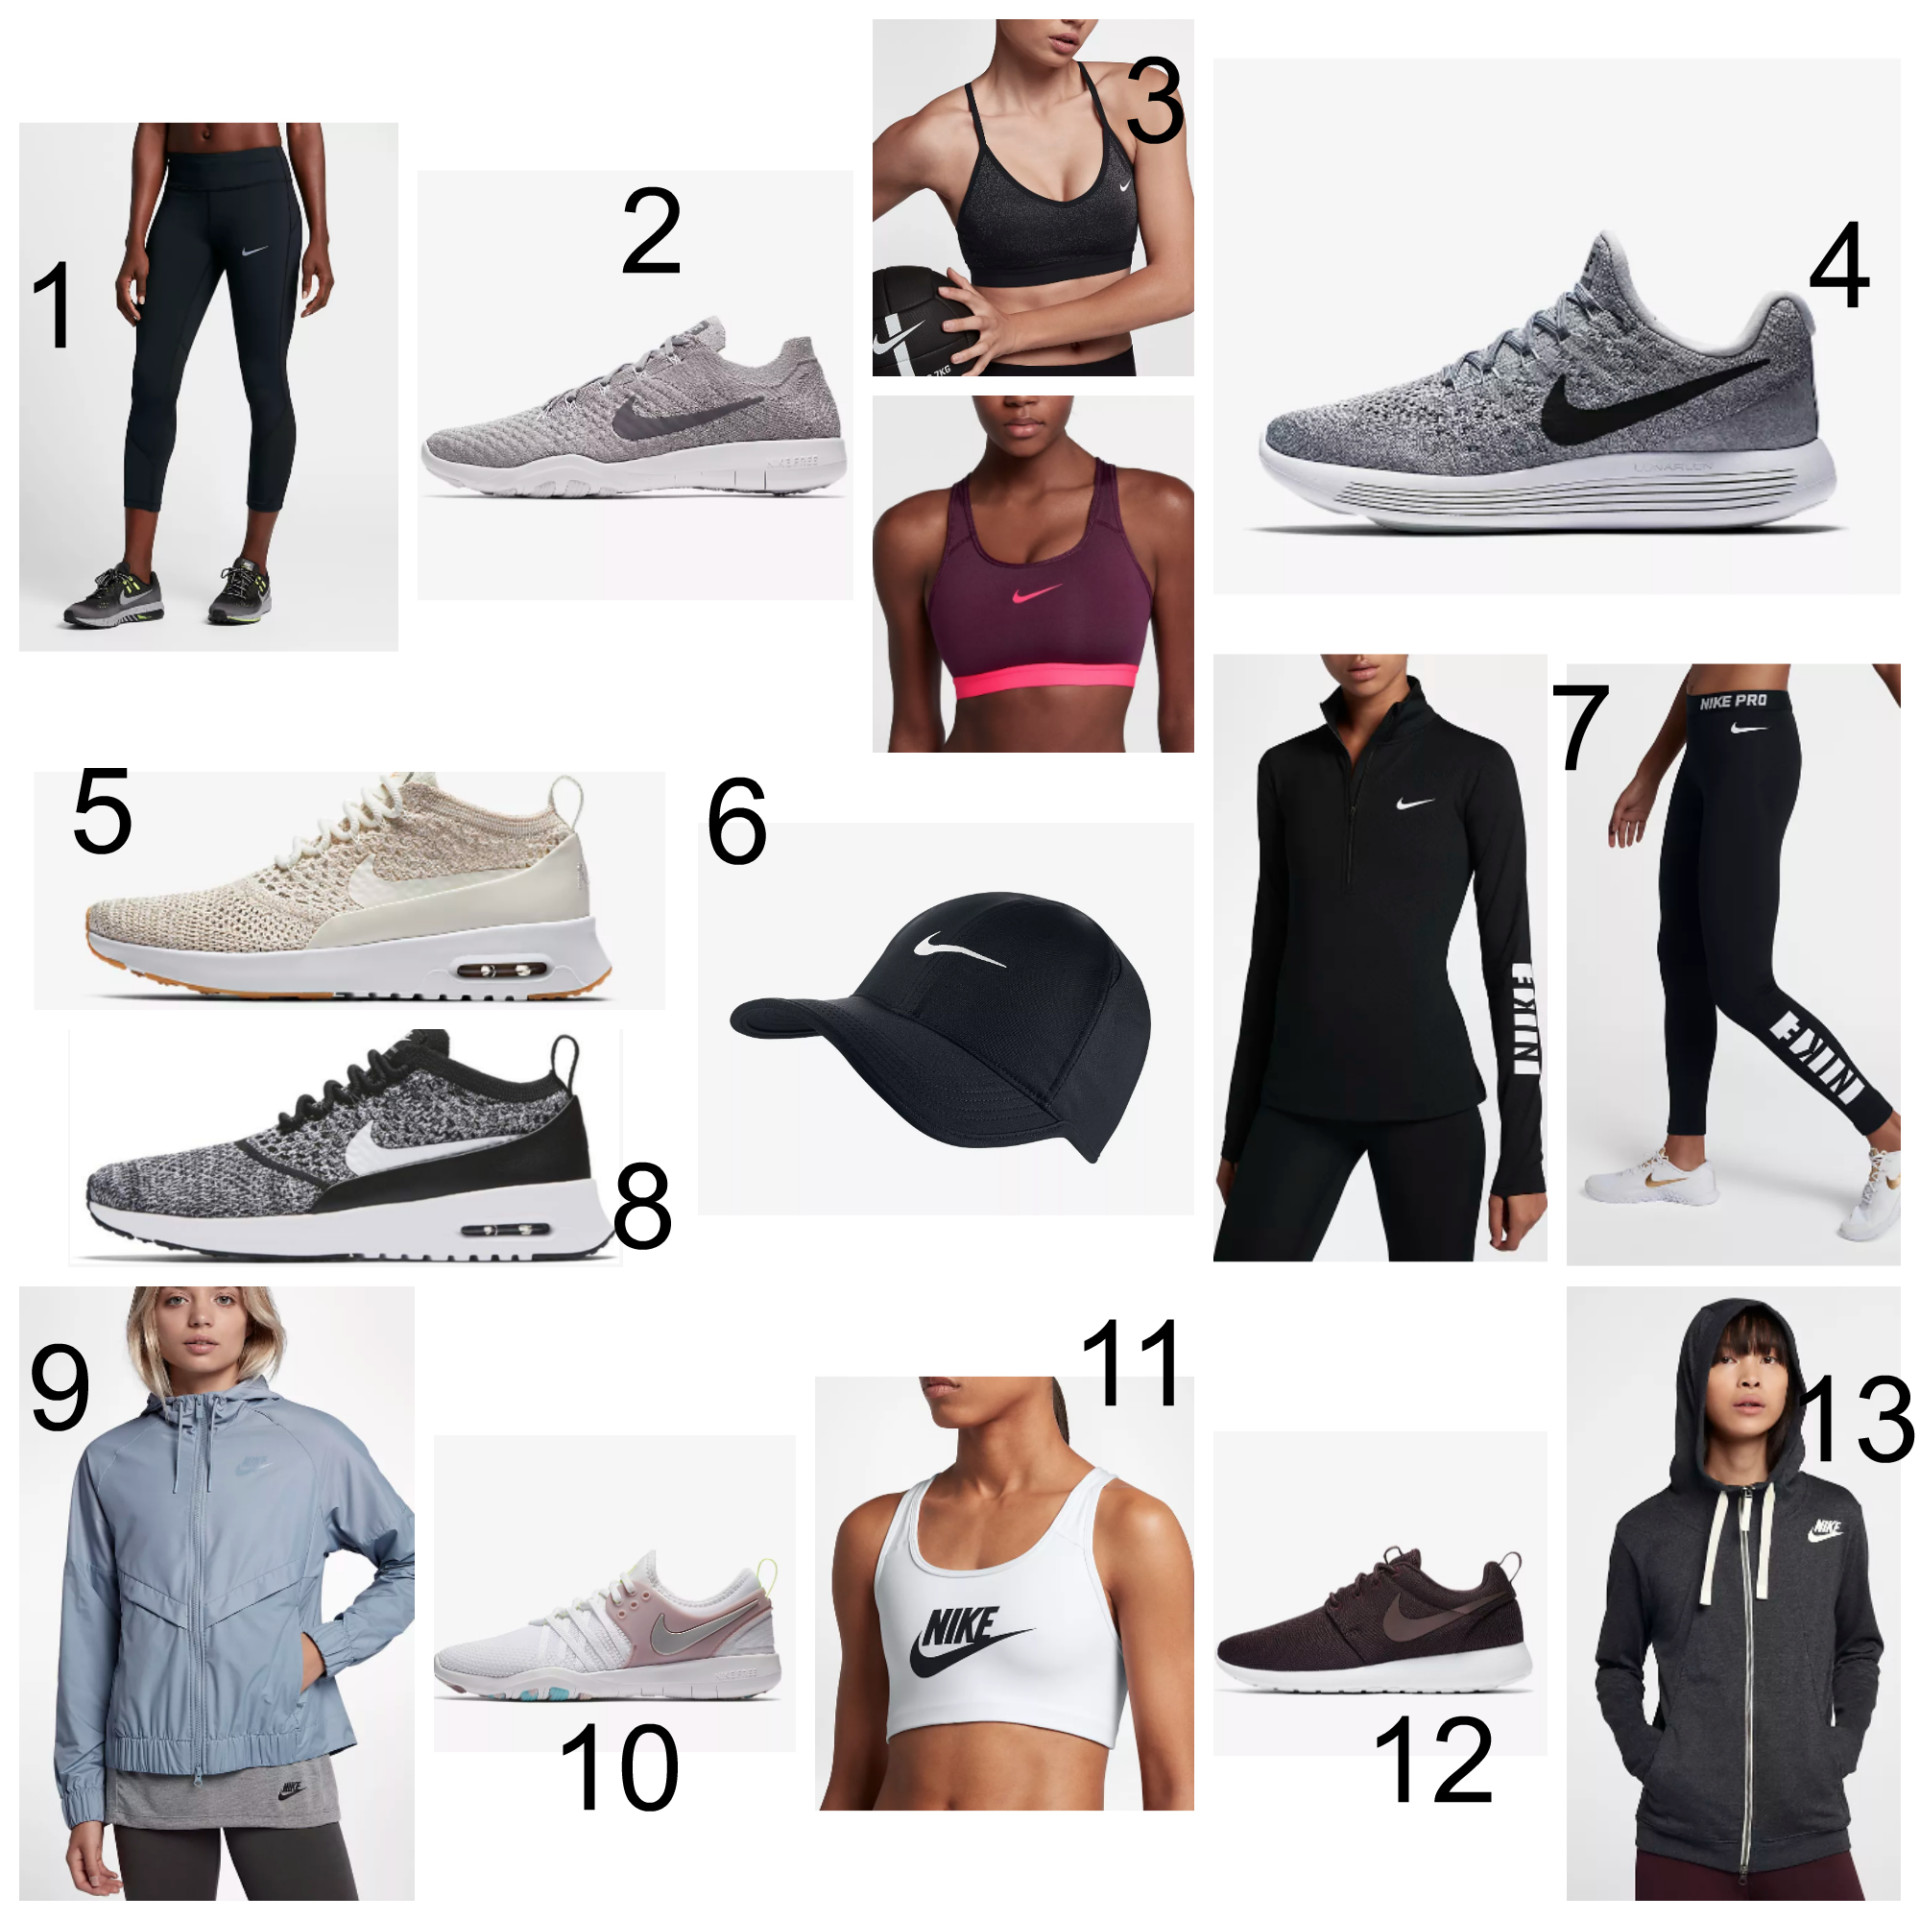 extra off nike sale